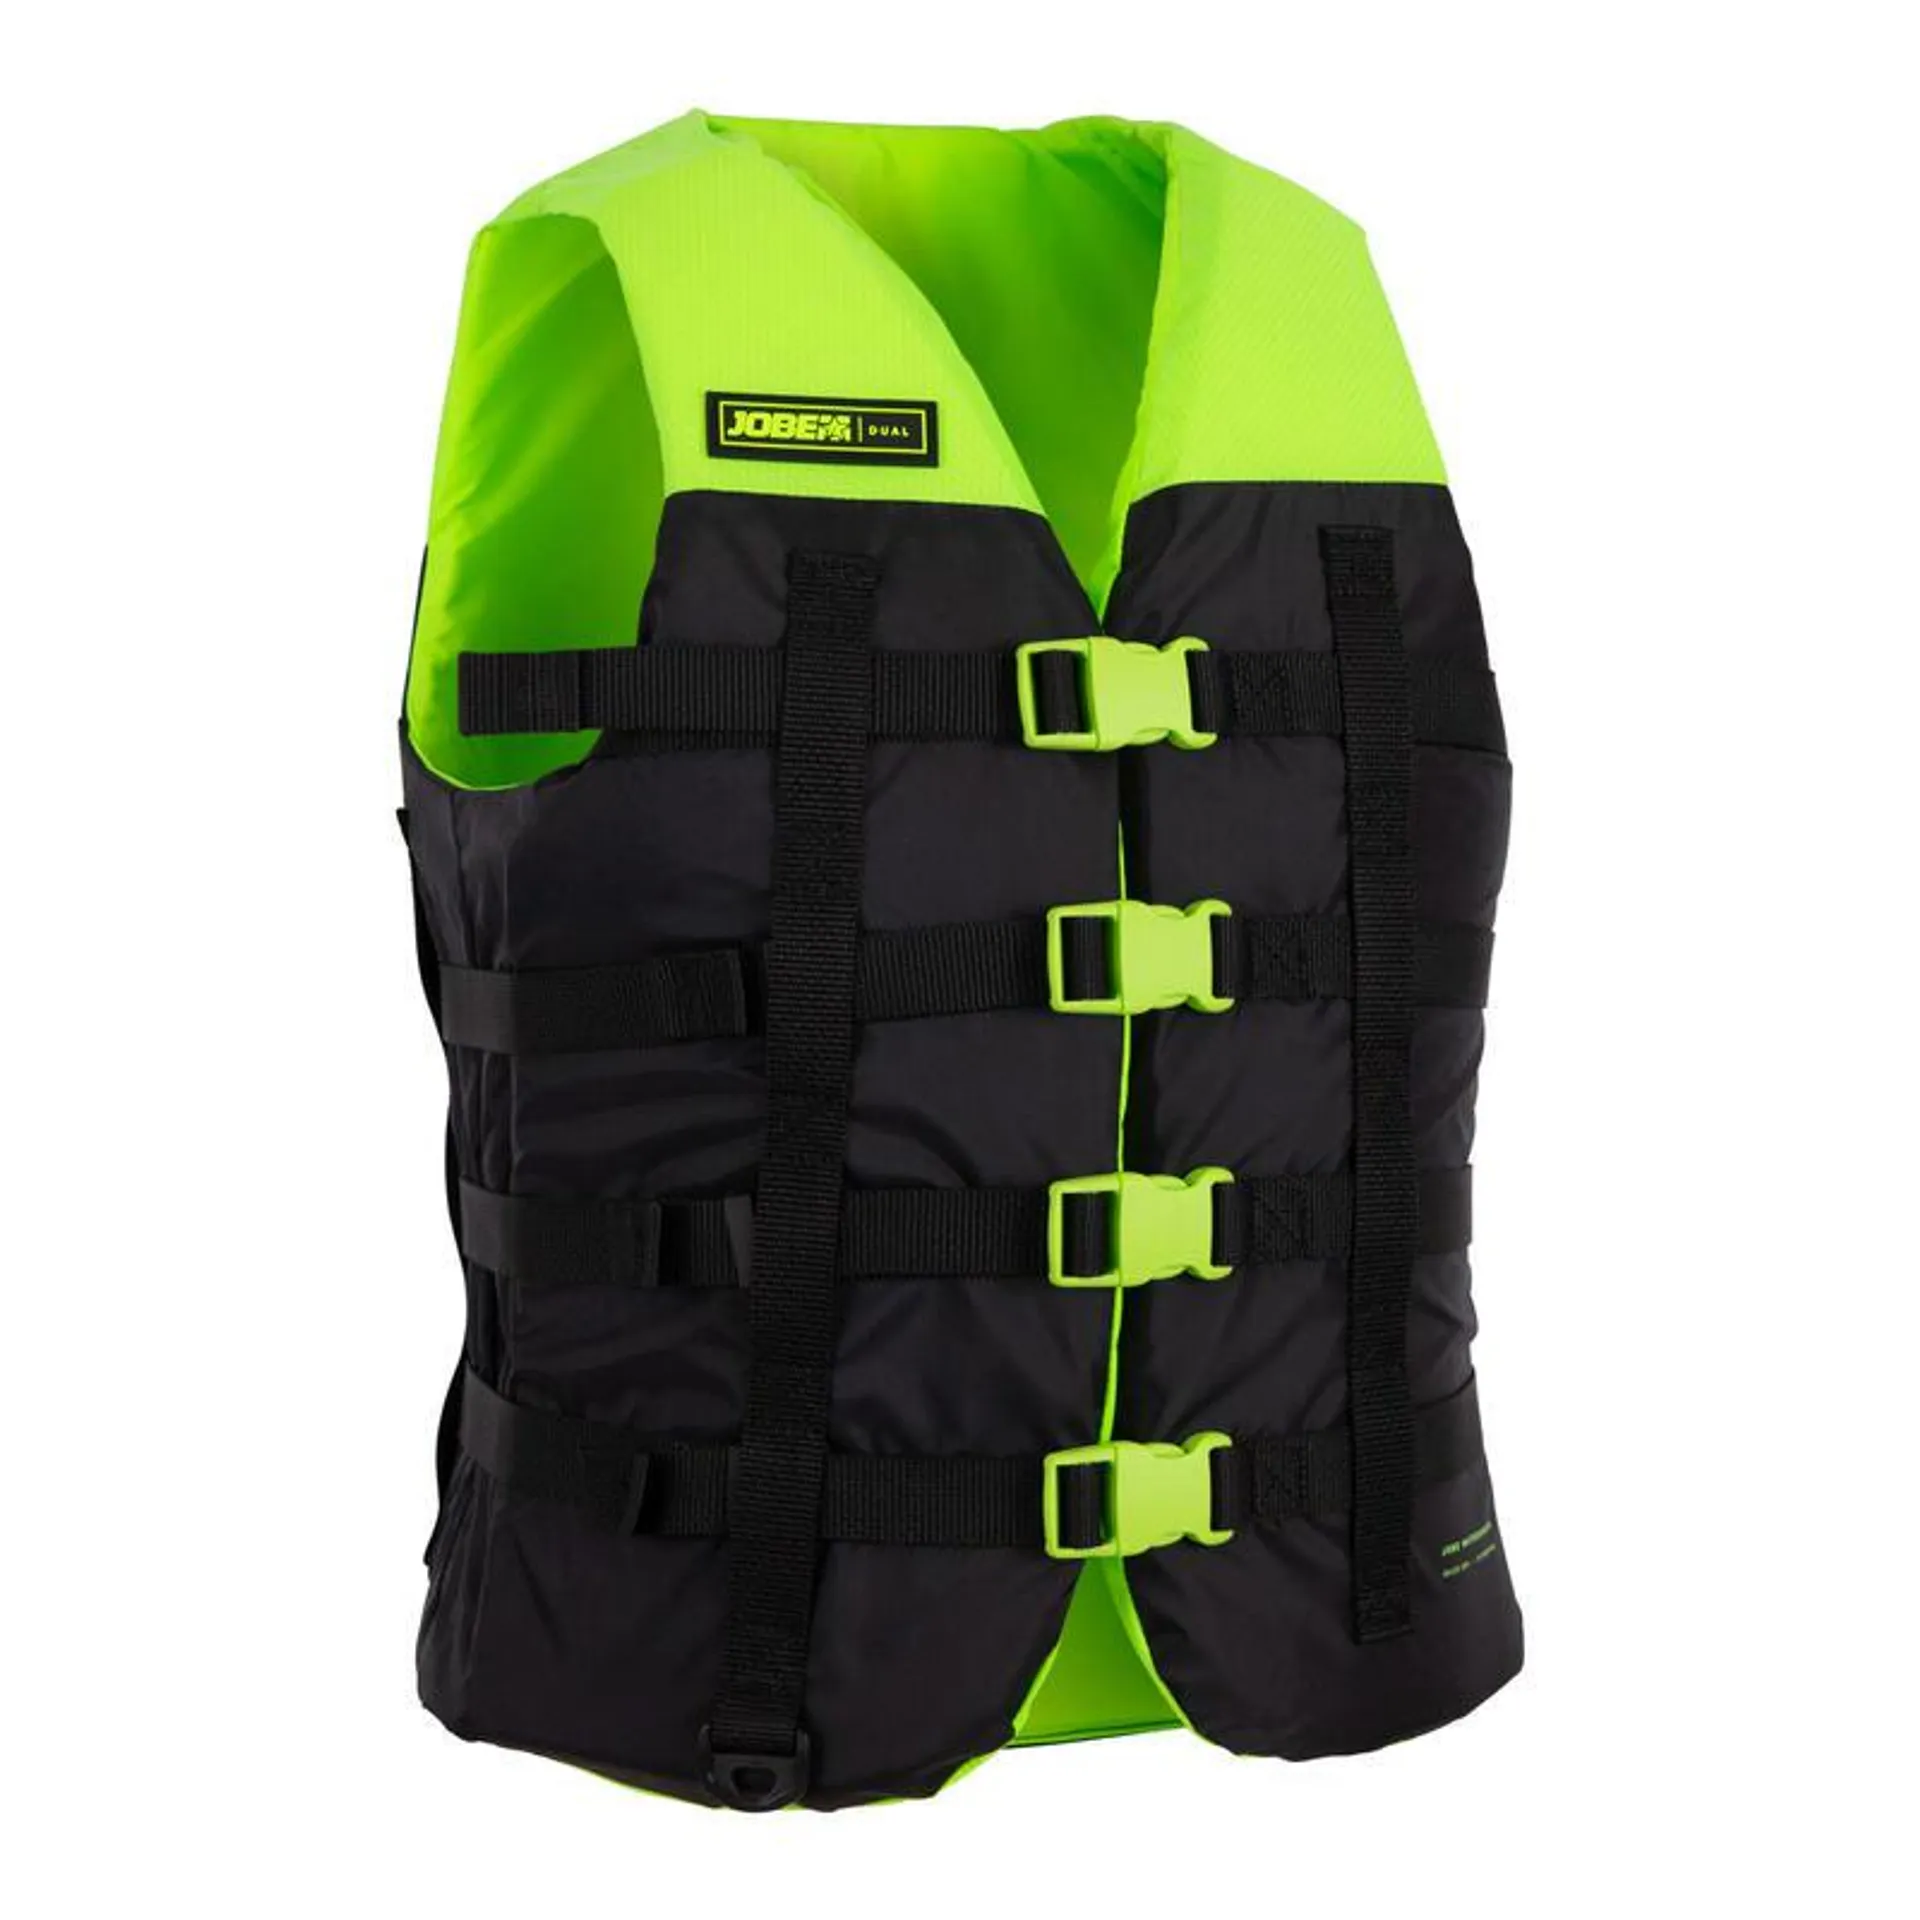 Dual Life Vest (50N) - Lime Green